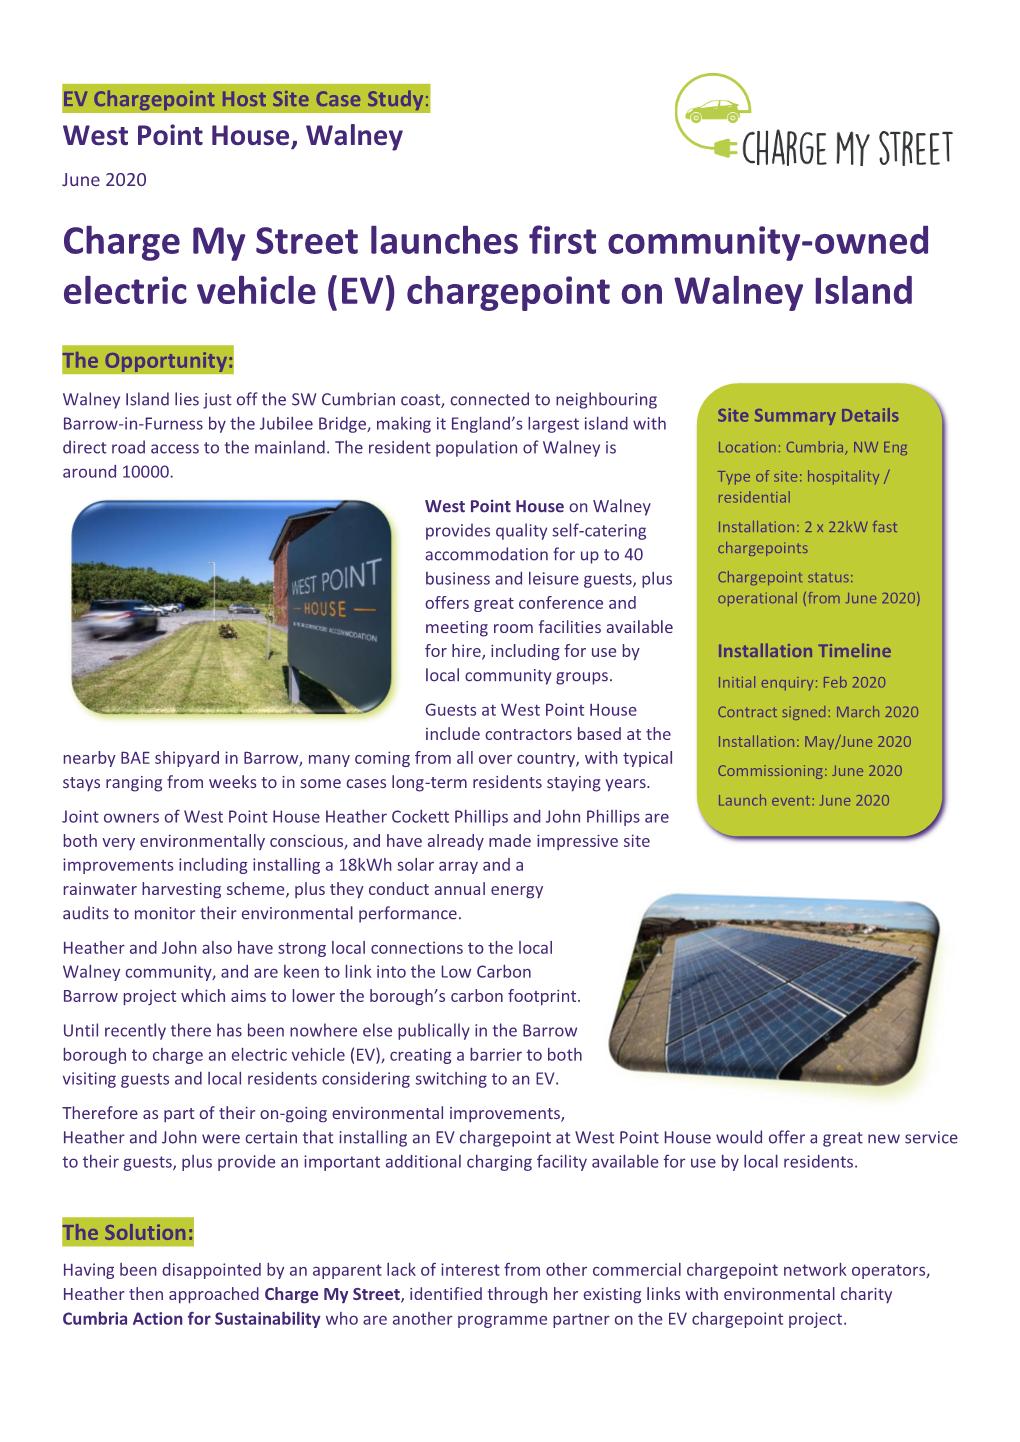 West Point House, Walney June 2020 Charge My Street Launches First Community-Owned Electric Vehicle (EV) Chargepoint on Walney Island